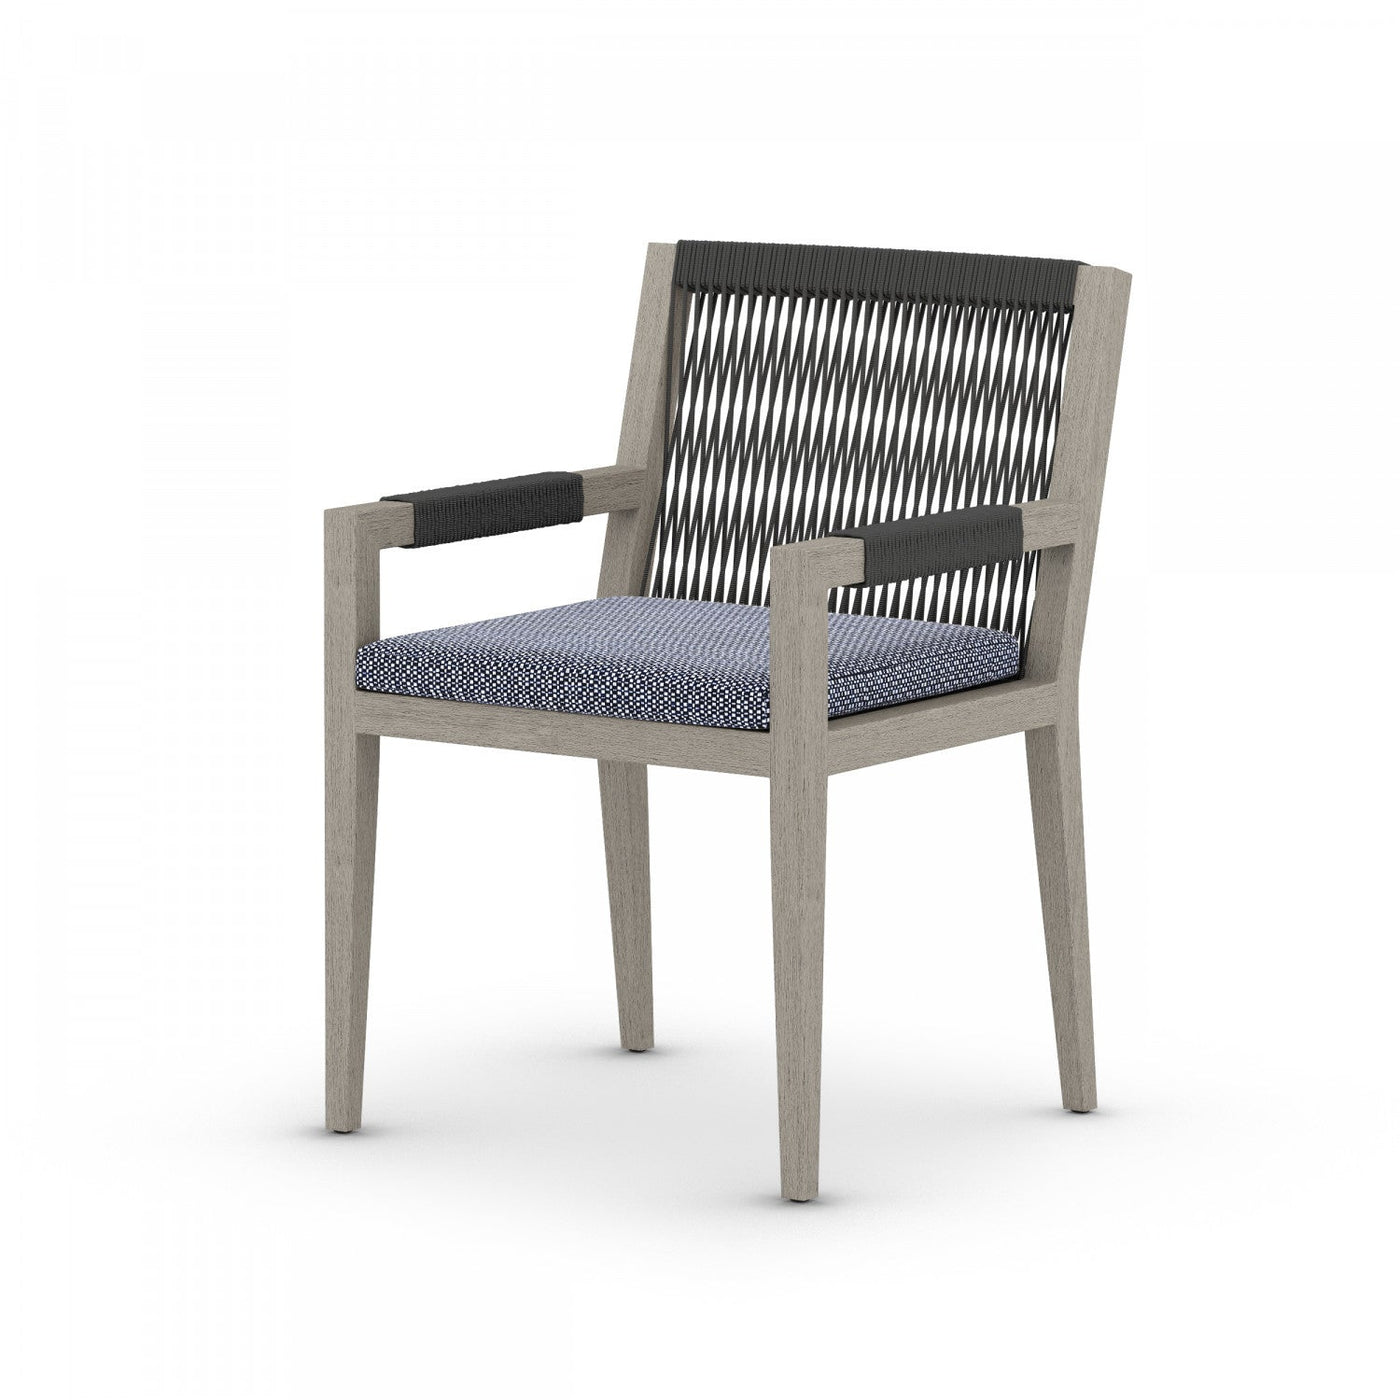 SHERWOOD OUTDOOR DINING ARMCHAIR, WEATHERED GREY